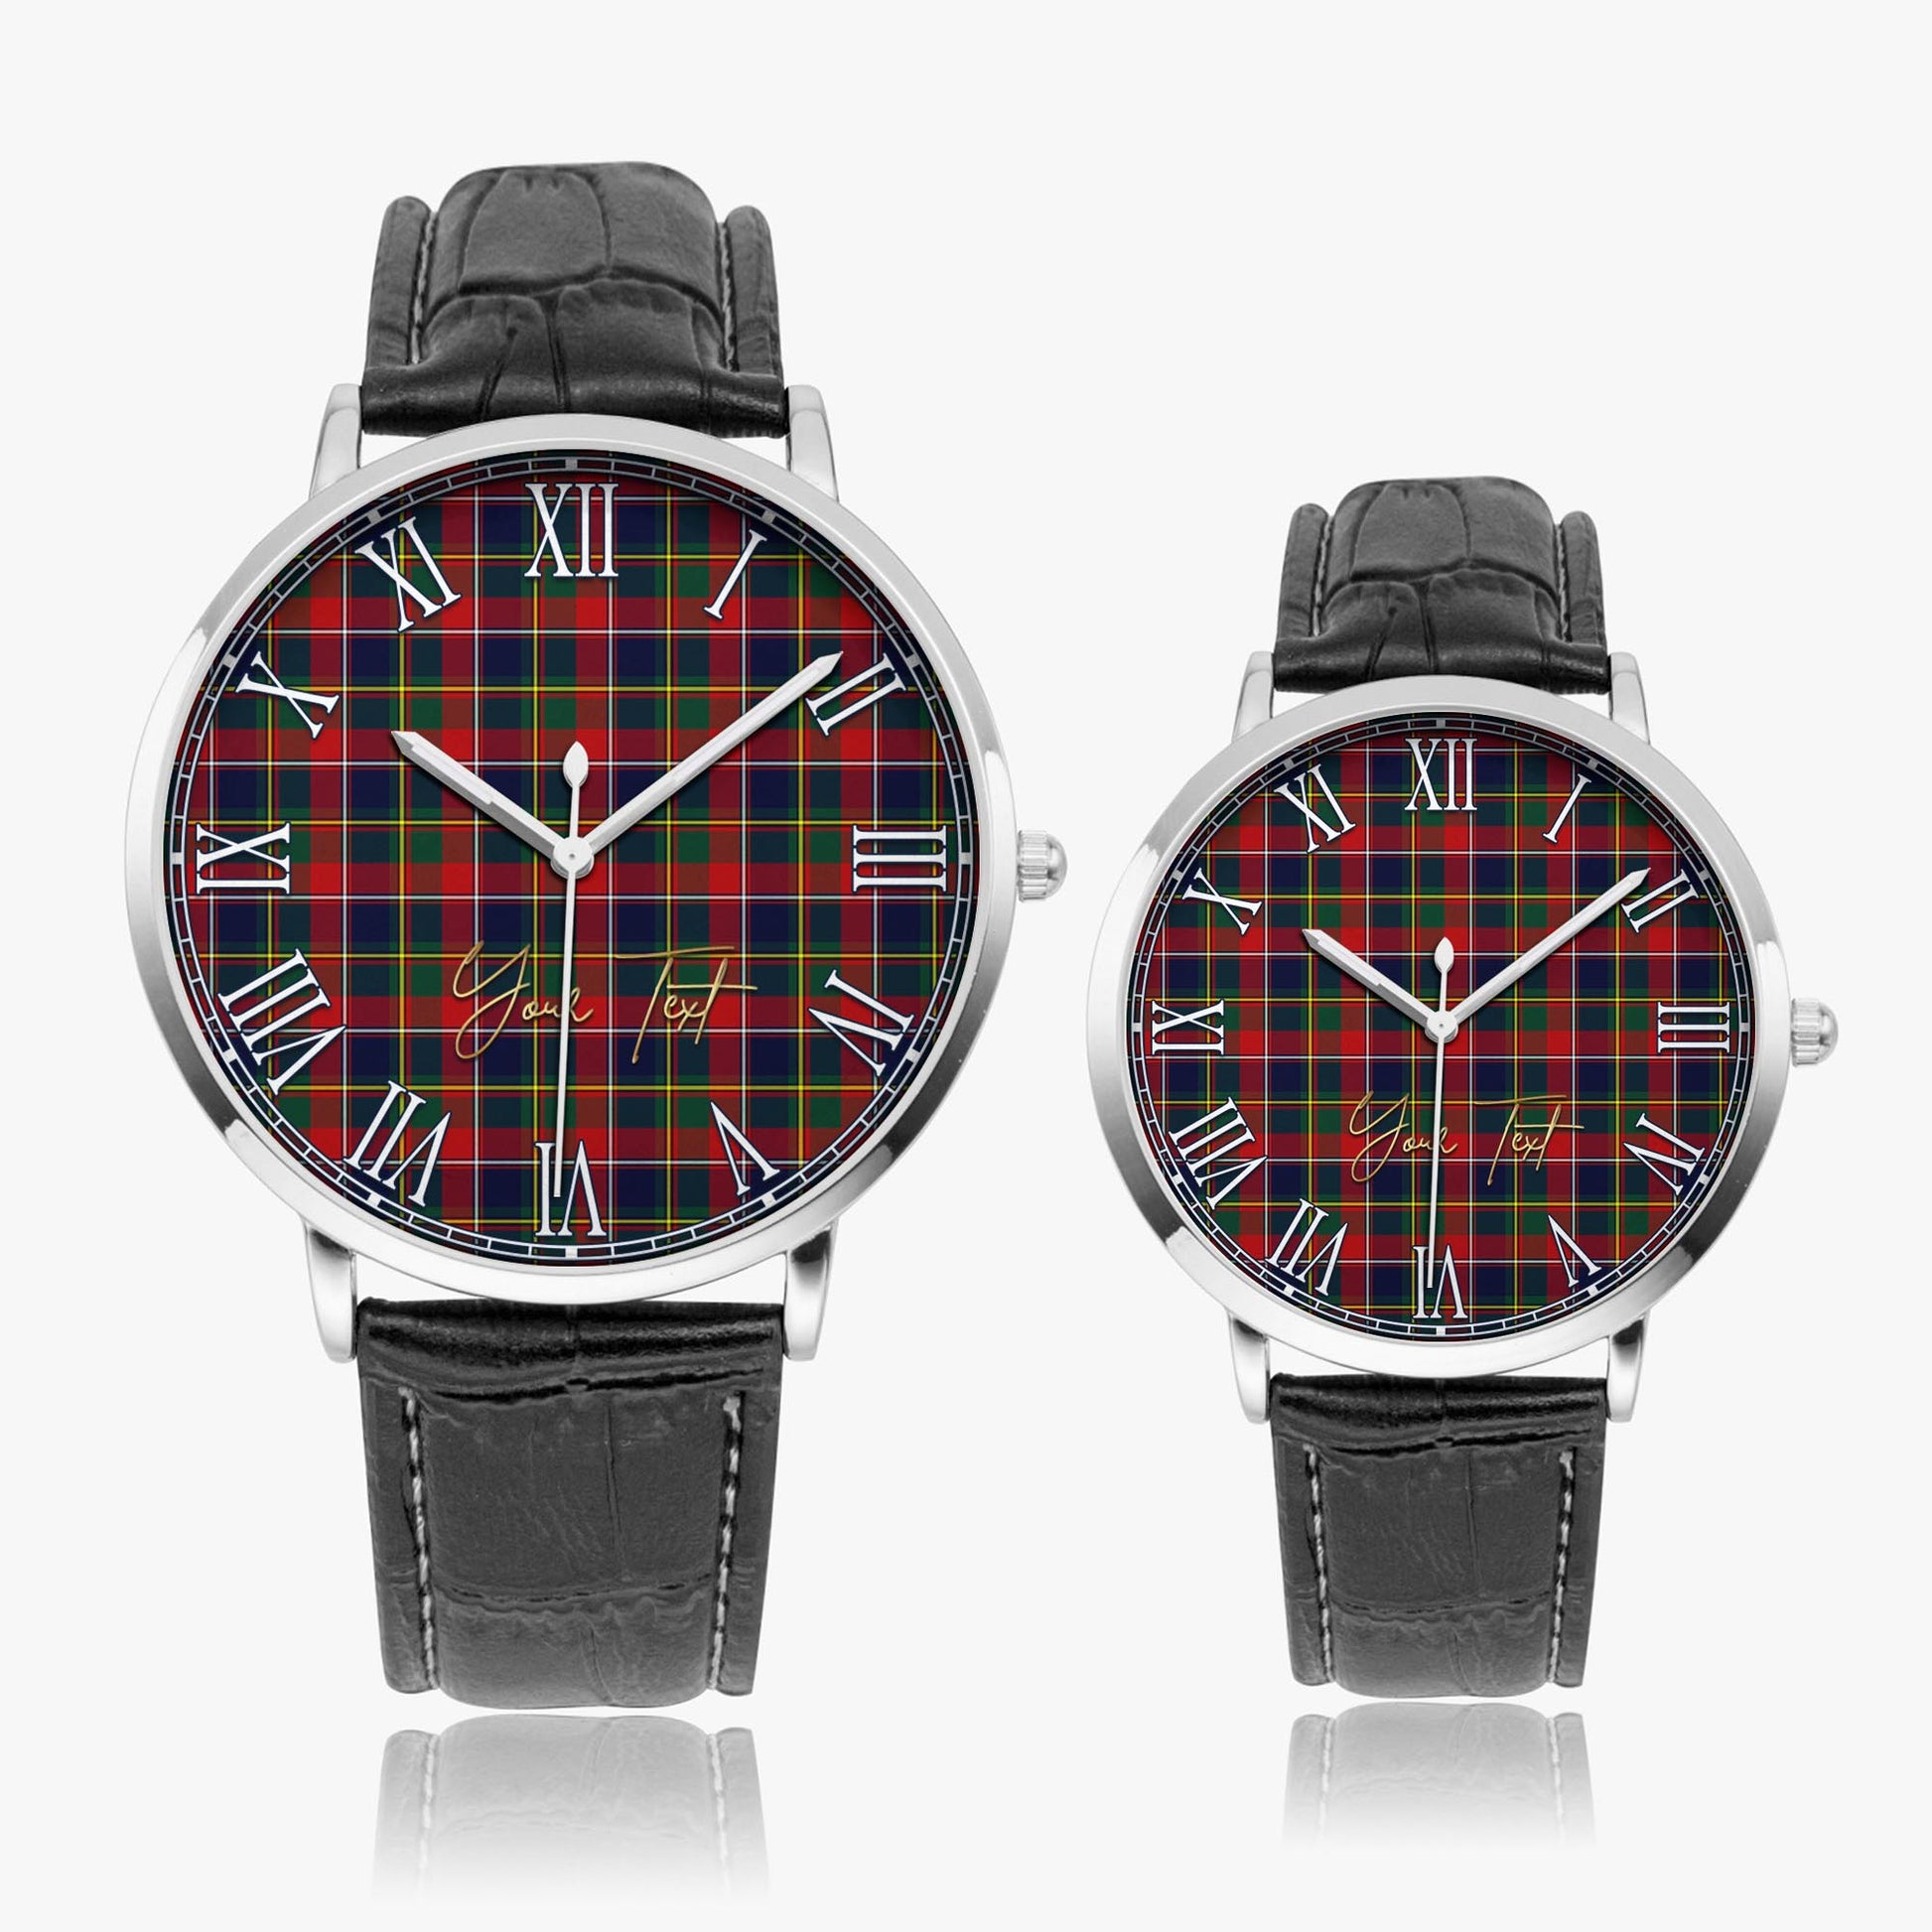 Quebec Province Canada Tartan Personalized Your Text Leather Trap Quartz Watch Ultra Thin Silver Case With Black Leather Strap - Tartanvibesclothing